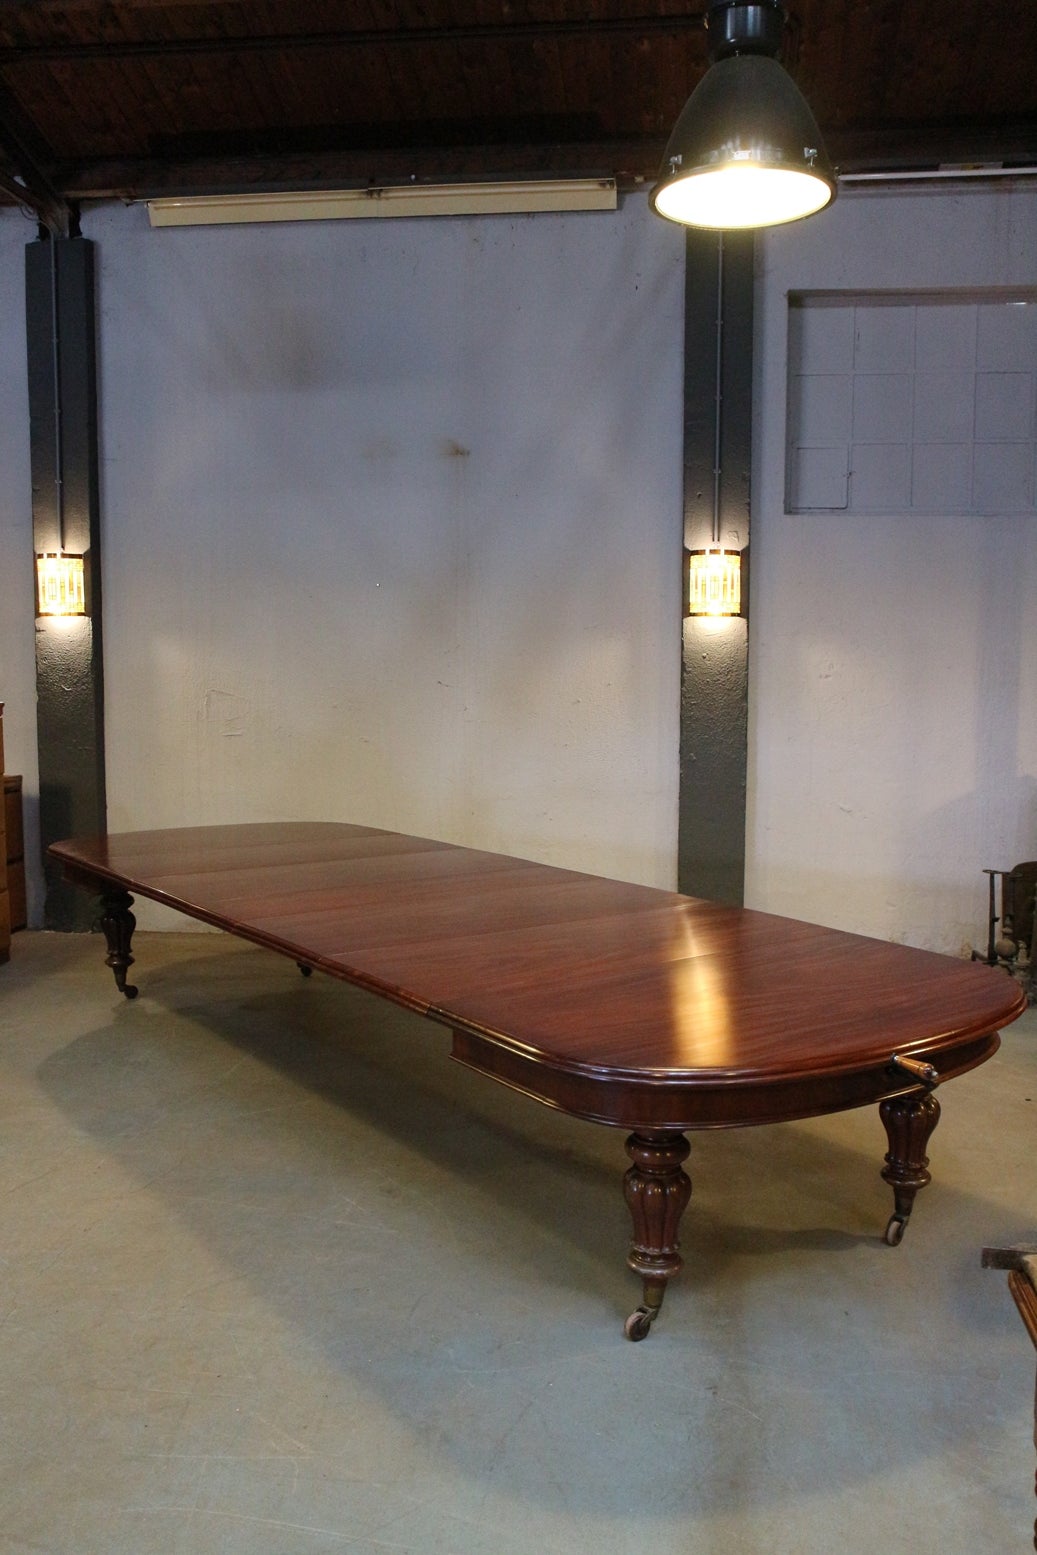 Large Antique mahogany Dining table / conference table Very large antique English table with 5 original leaves, all in perfect condition. Beautiful stylish leg. Beautiful and very solid antique dining room table / conference table. Superb mahogany.